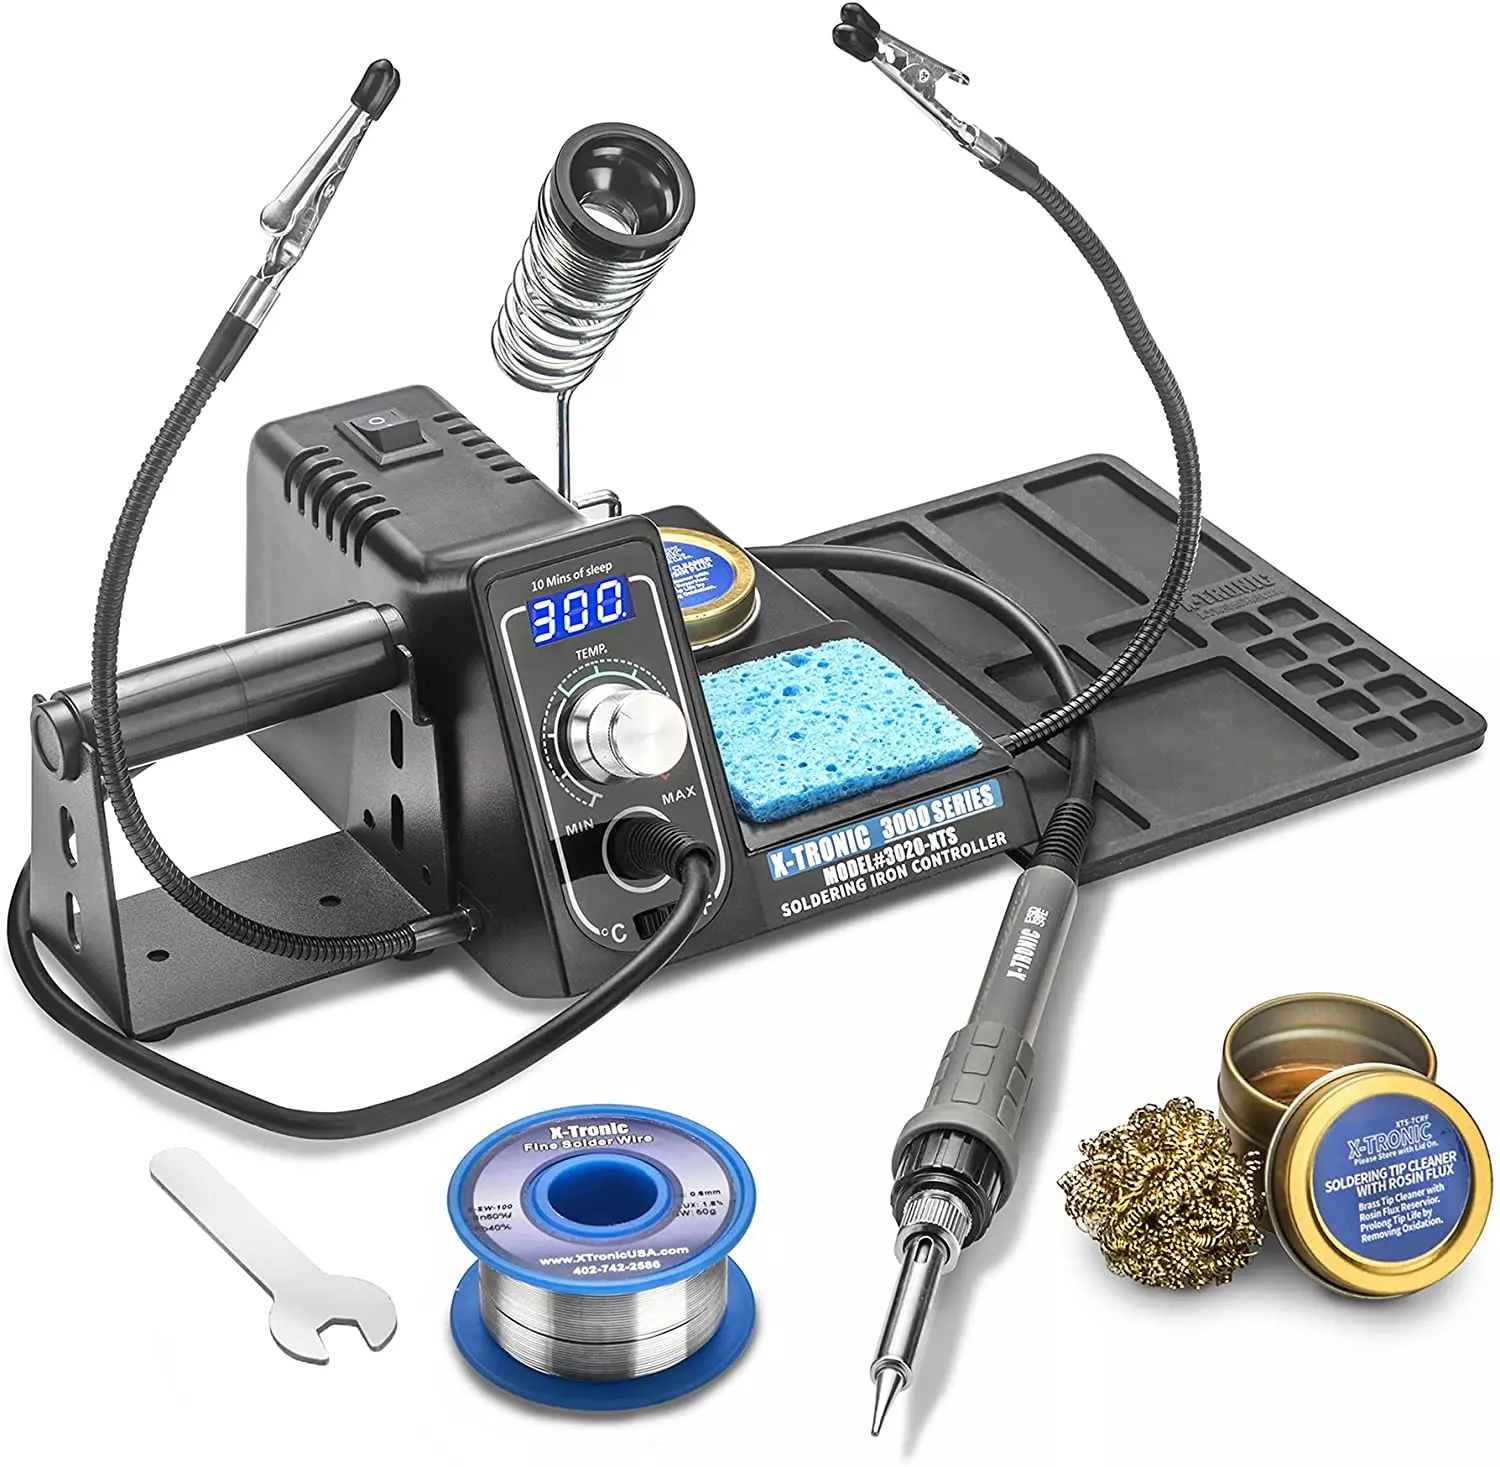 The Best Soldering Stations (Review) in 2022